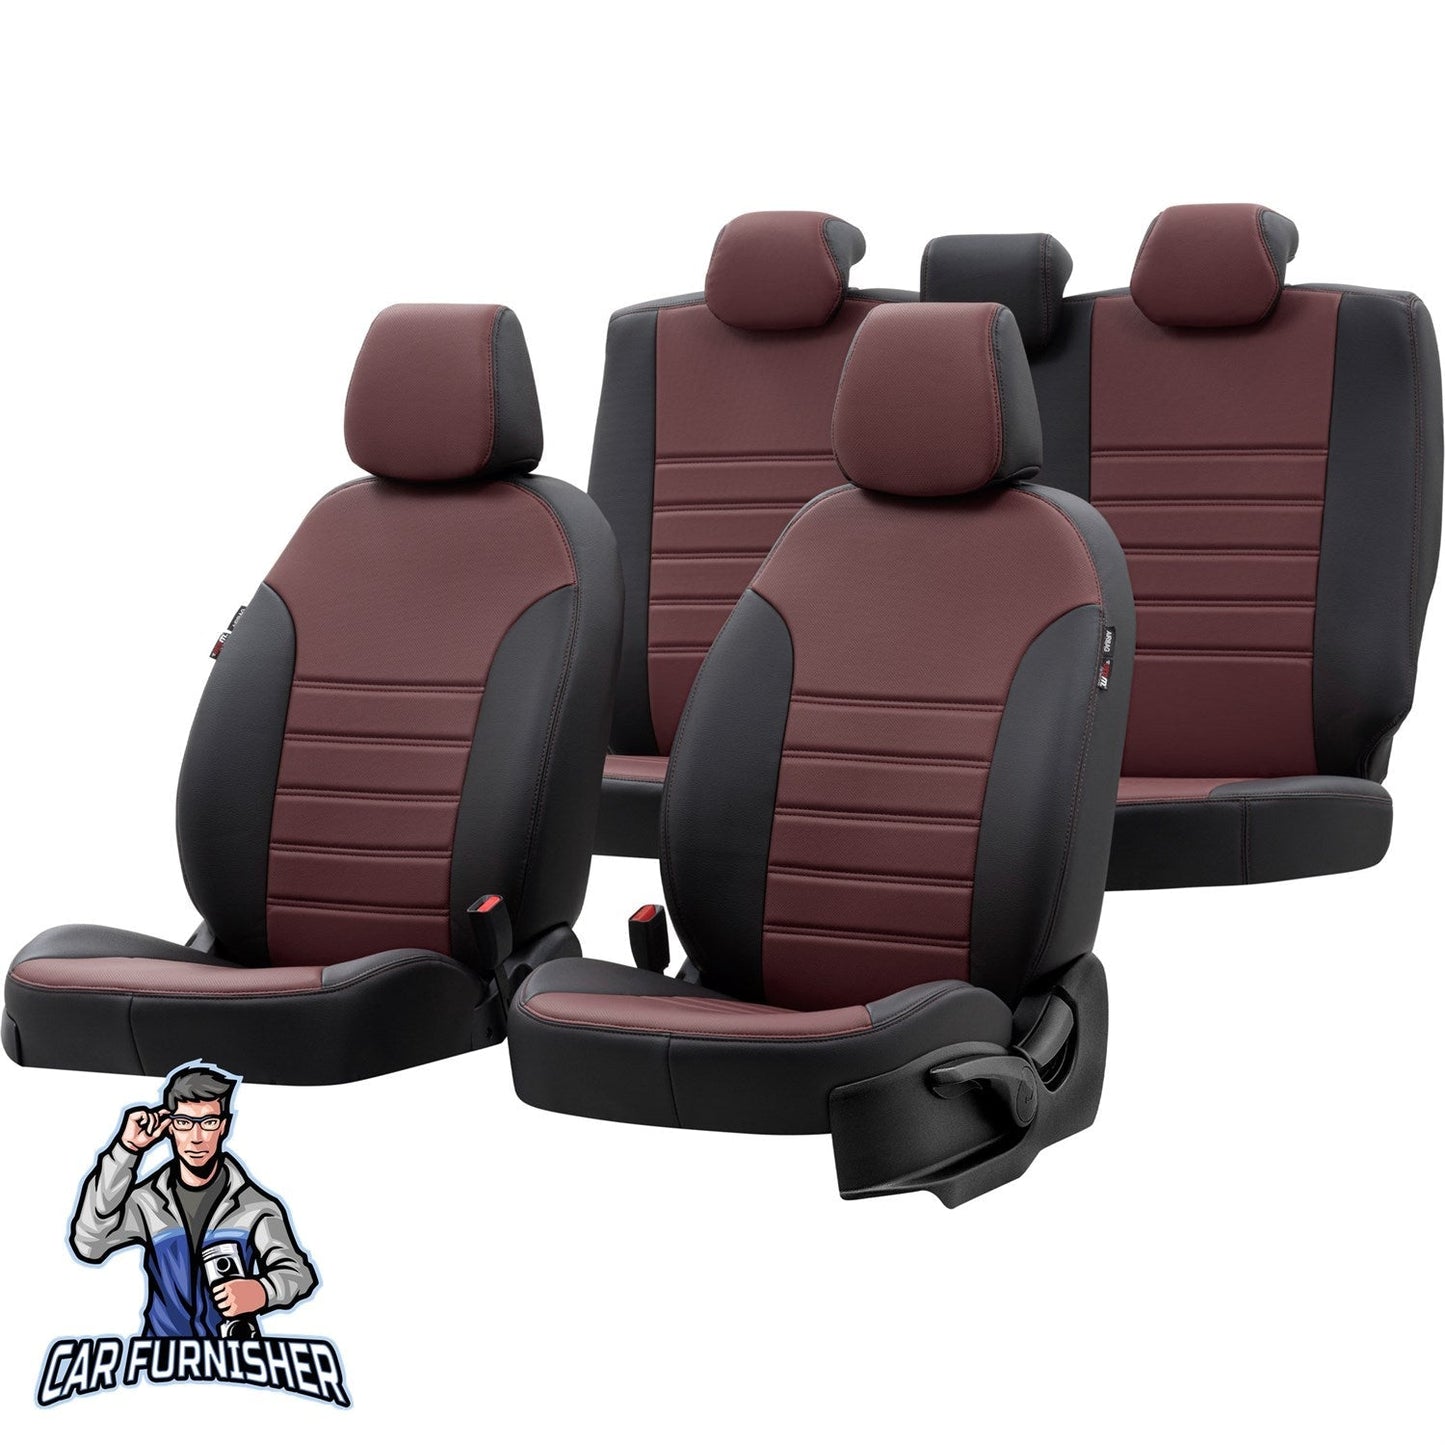 Volvo XC70 Seat Cover Istanbul Leather Design Burgundy Leather